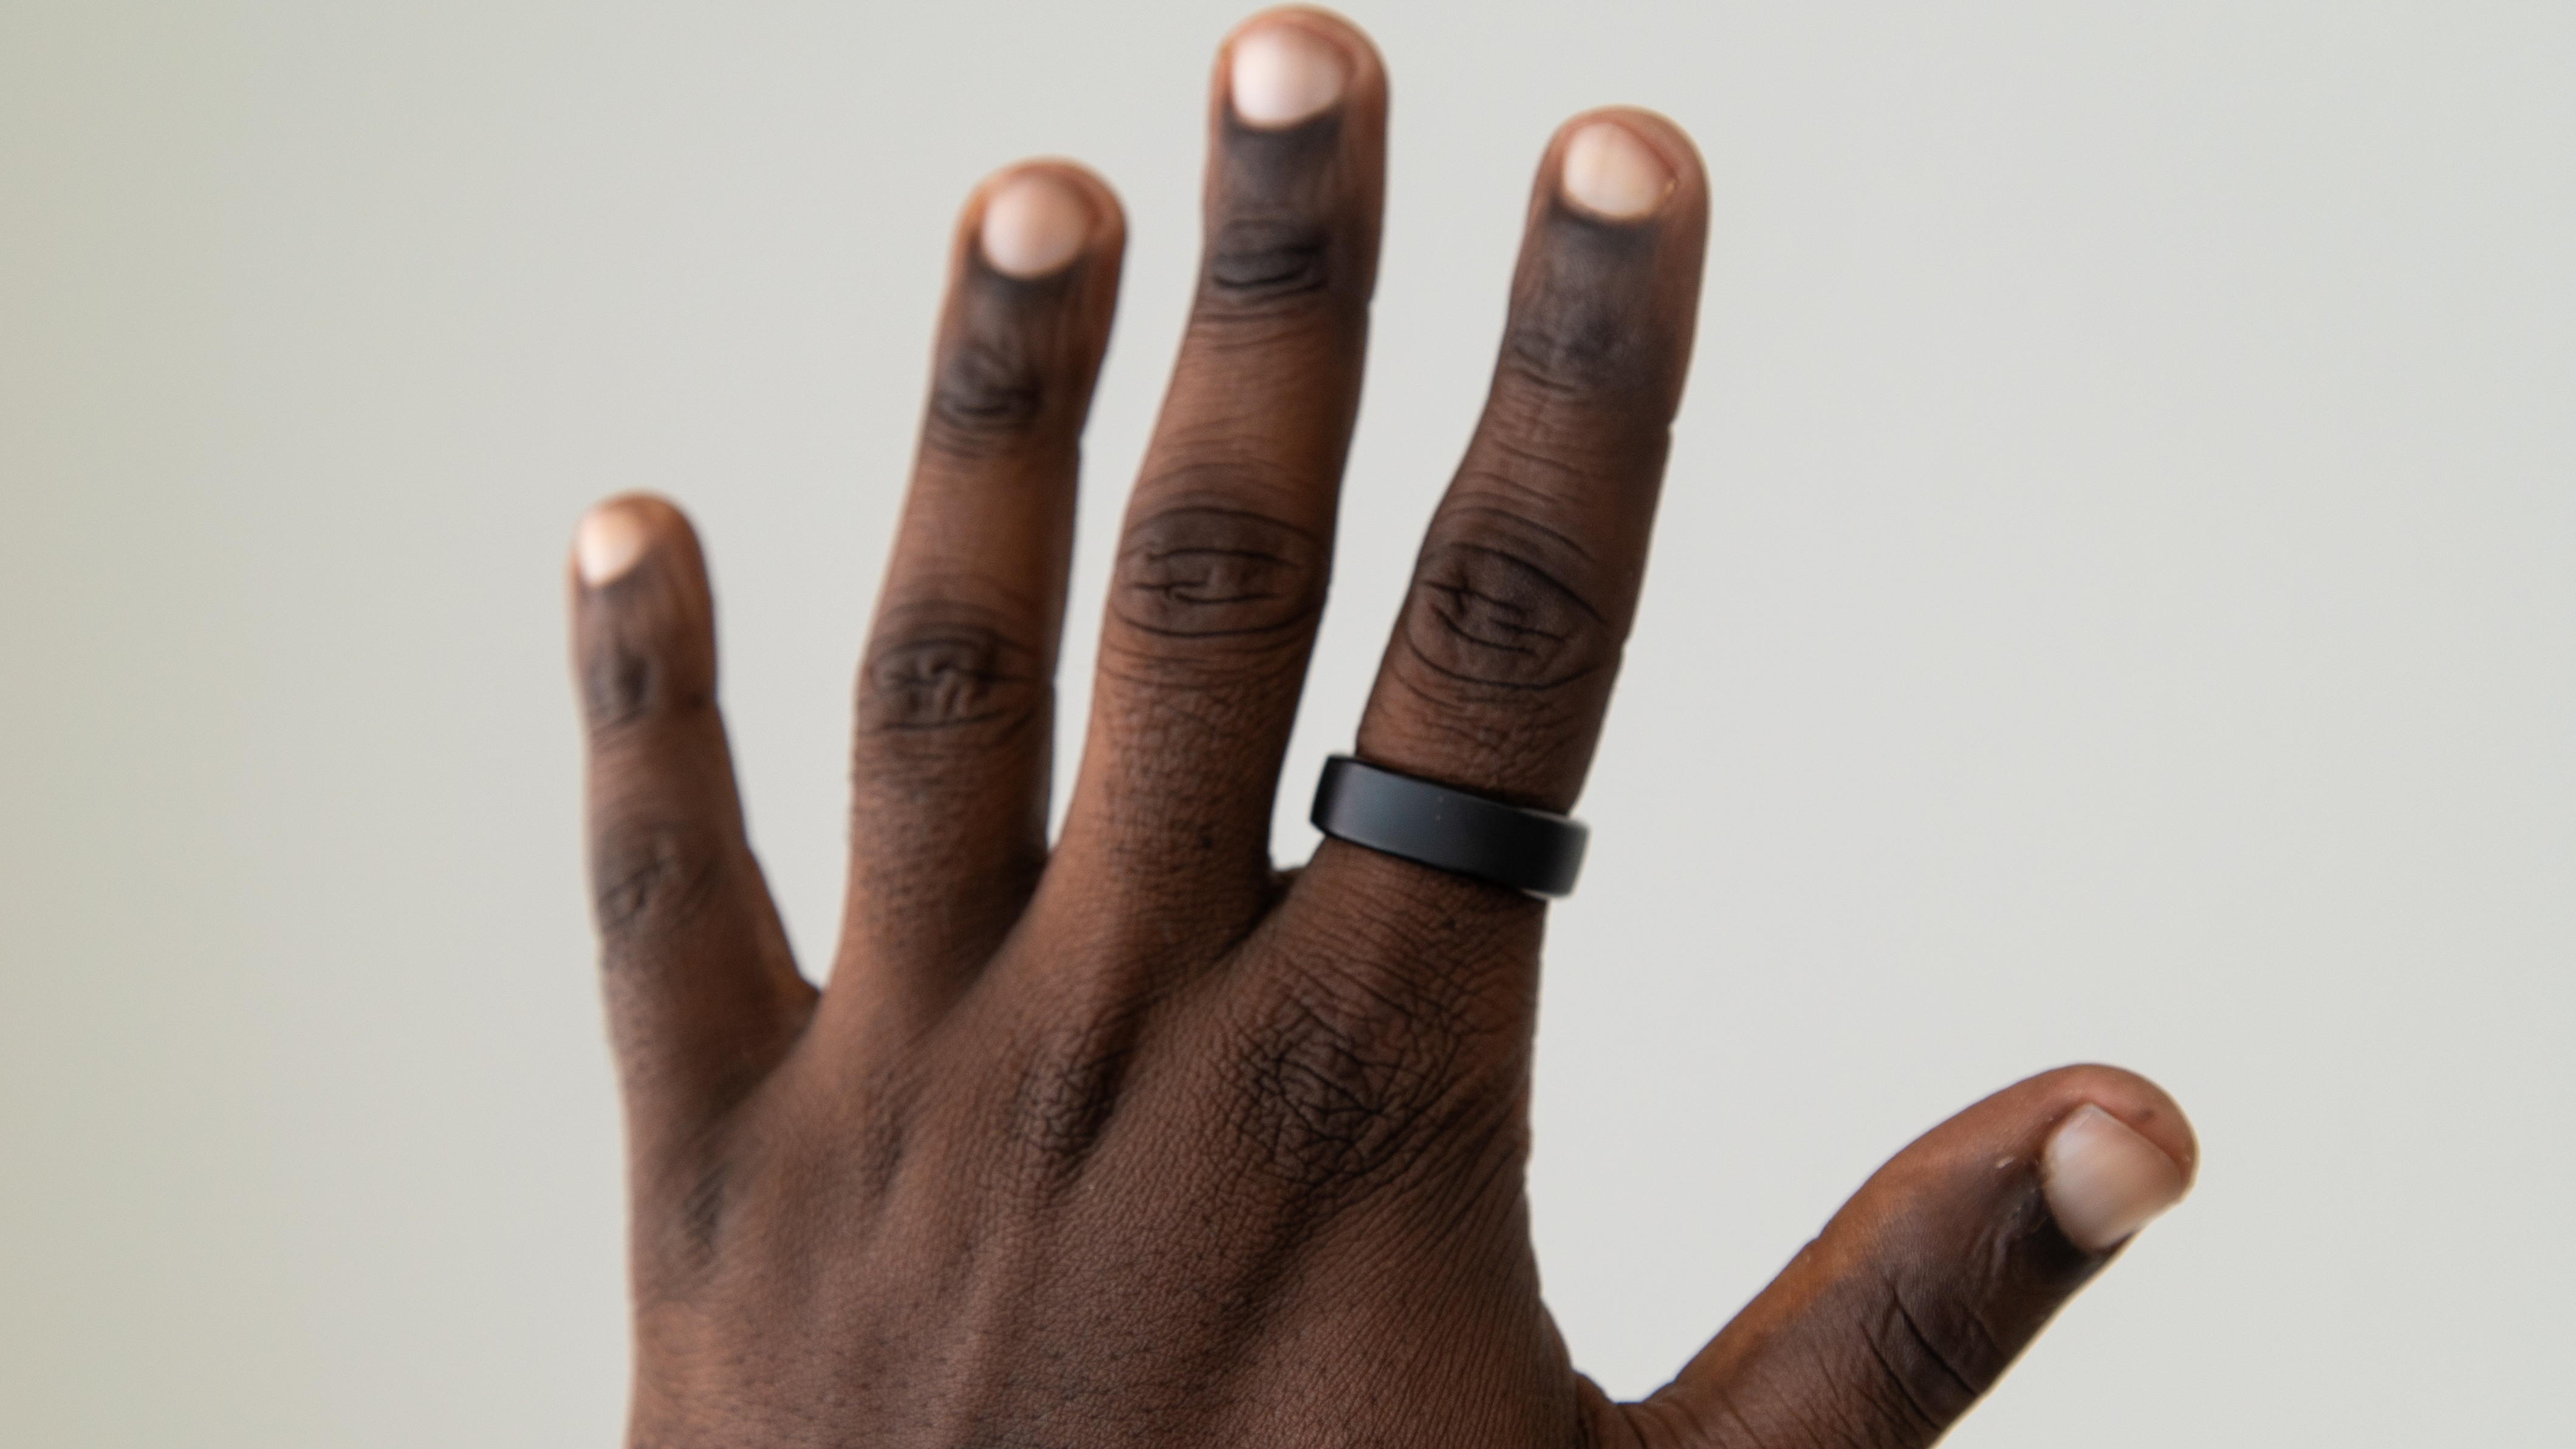 The RingConn Smart Ring on a hand